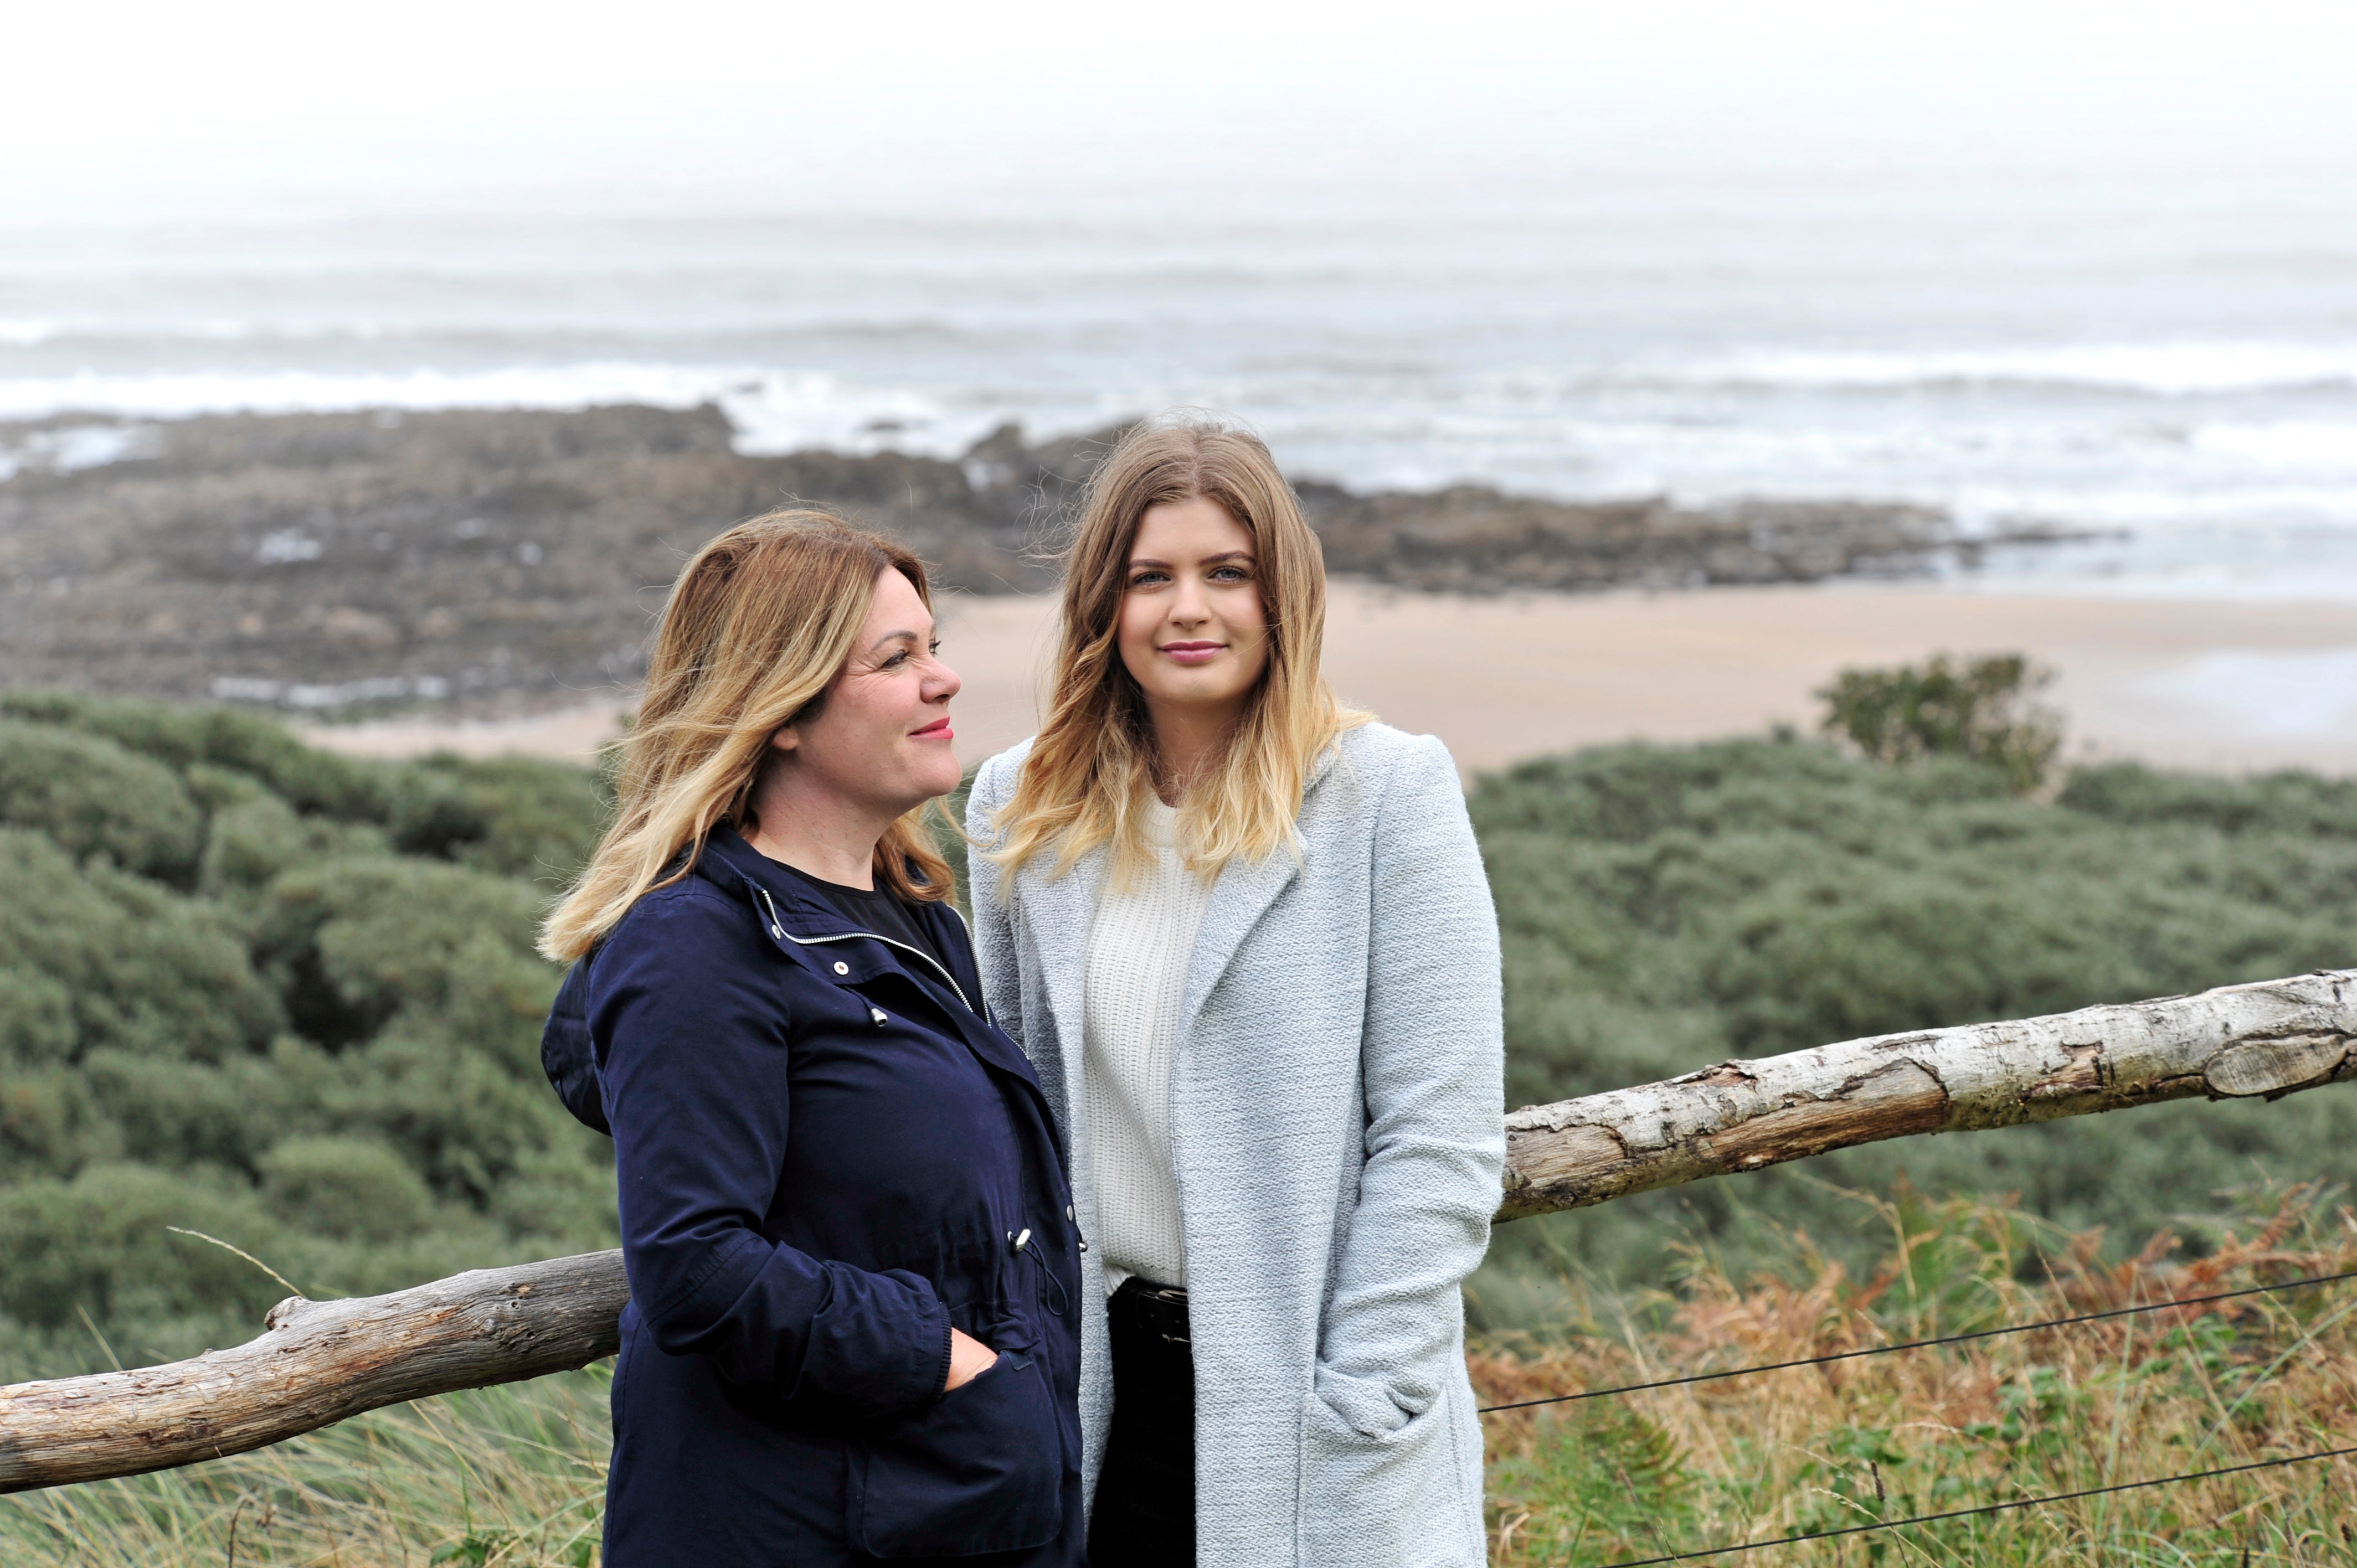 Two women are standing on a hill in front of a beach. The woman on the left has blonde wavy hair and is looking and smiling at the woman on the right. The woman on the right is looking and smiling at the camera. She has blonde wavy hair.